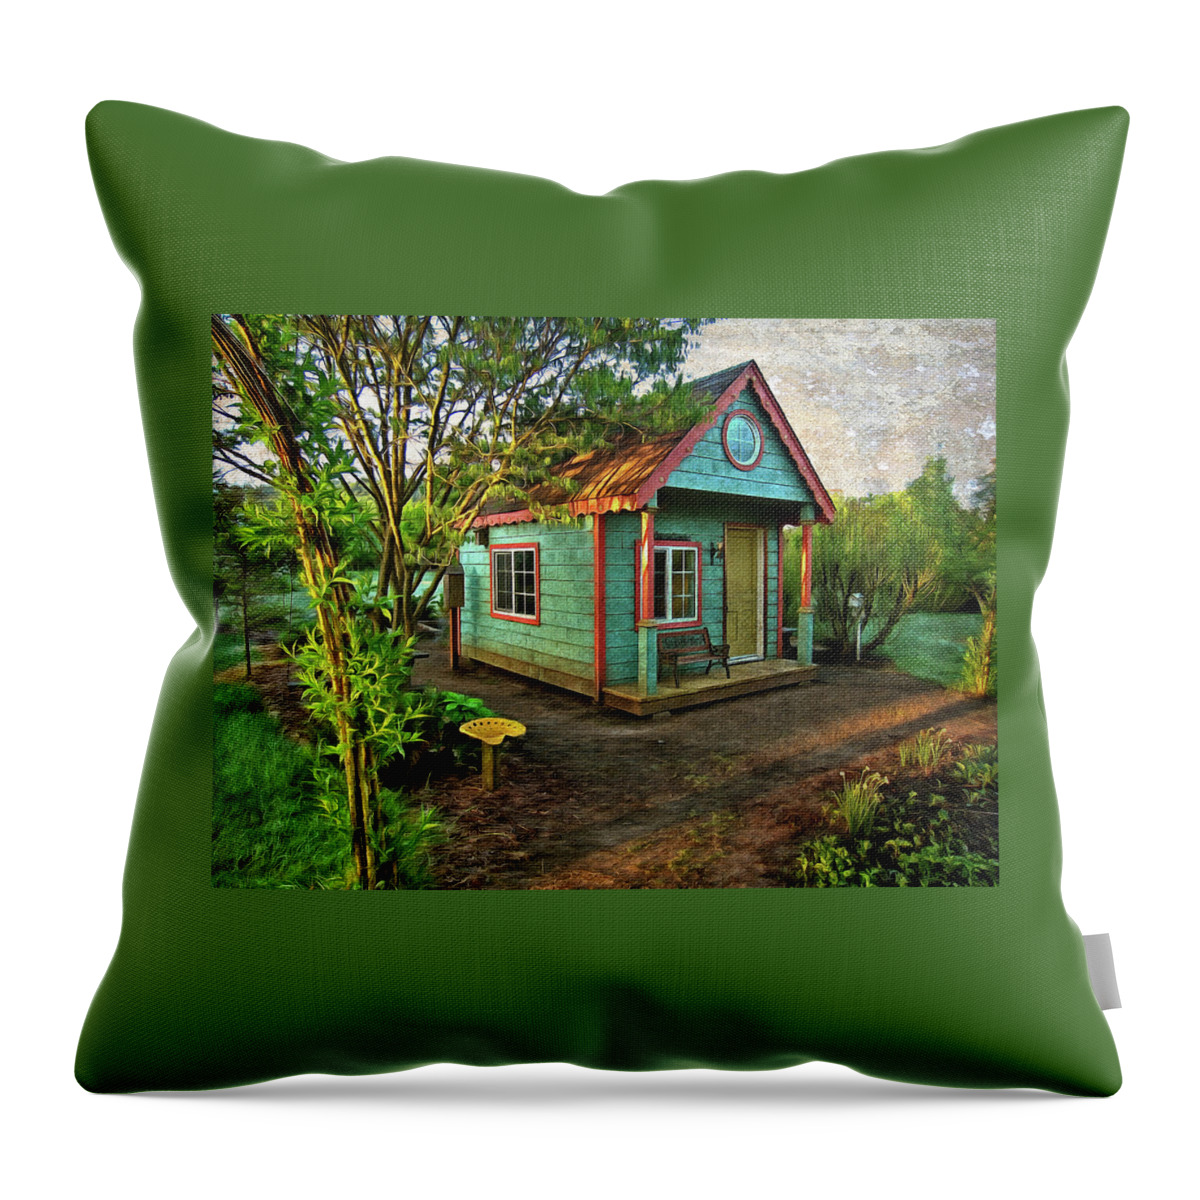 Cottage Grove Oregon Throw Pillow featuring the photograph The Enchanted Garden Shed by Thom Zehrfeld